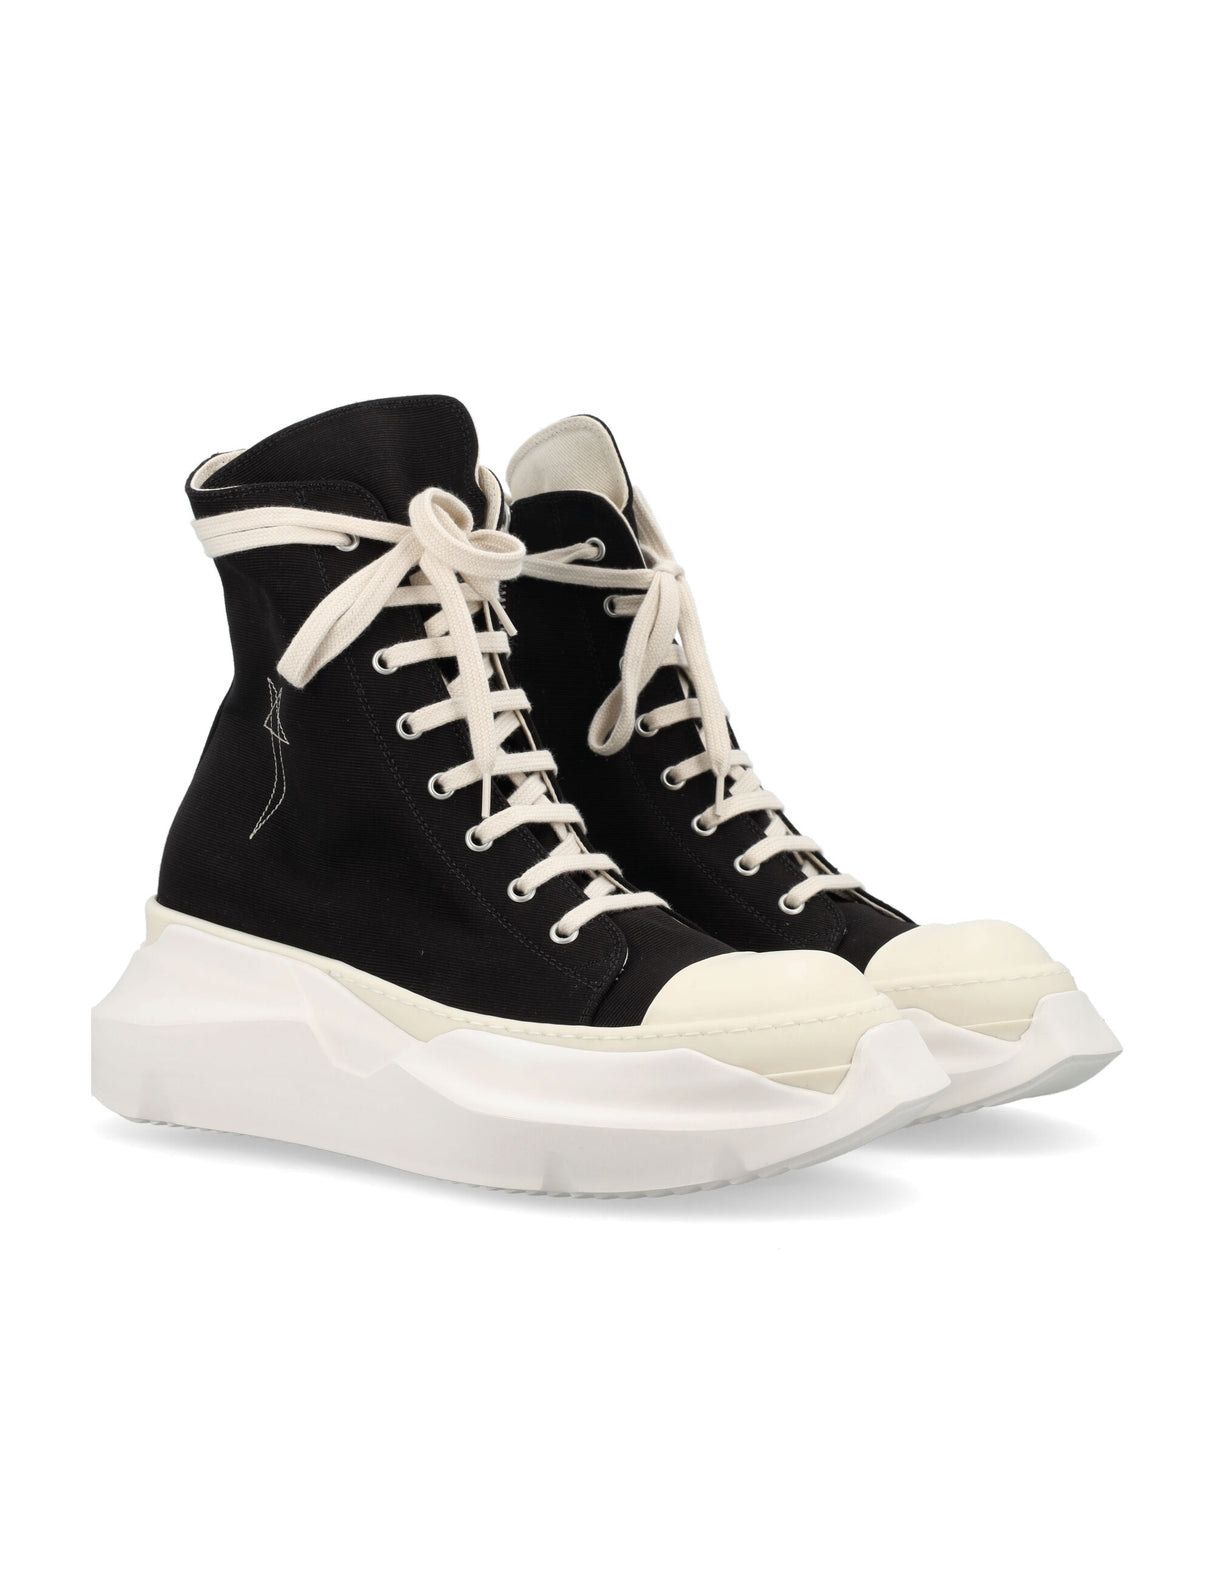 DRKSHDW Women's Abstract Sneak - High Top Sneakers with Side Zip and Embroidered Star